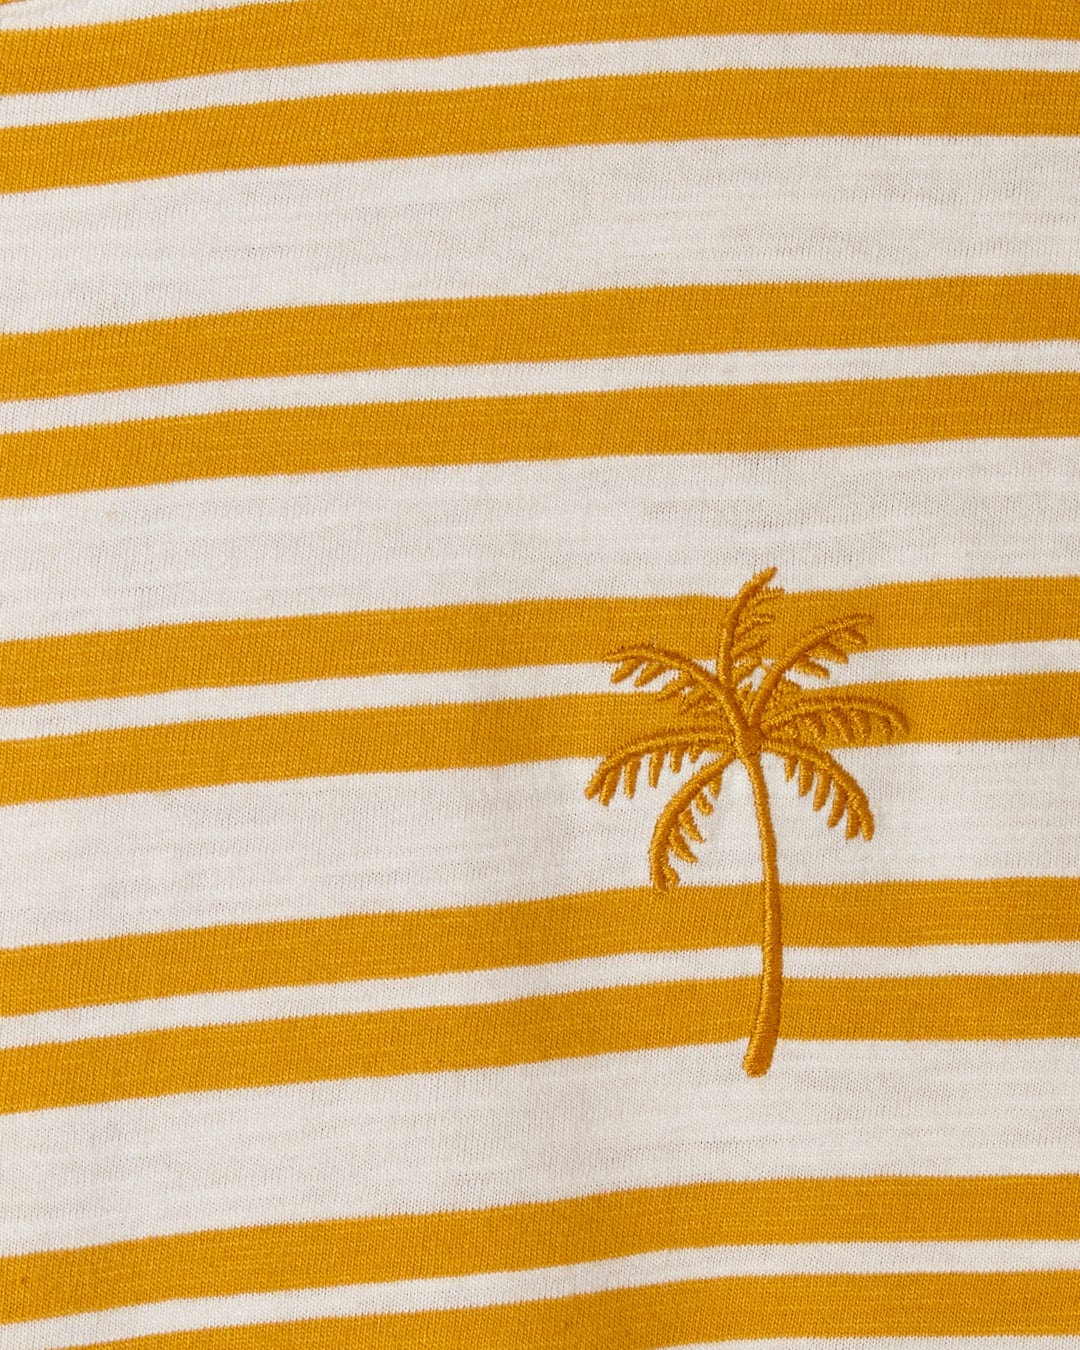 Striped fabric with an embroidered palm tree design, featuring a yarn dye stripe print and made from 100% cotton, like the Saltrock Camilla - Womens Short Sleeve T-Shirt - Yellow.